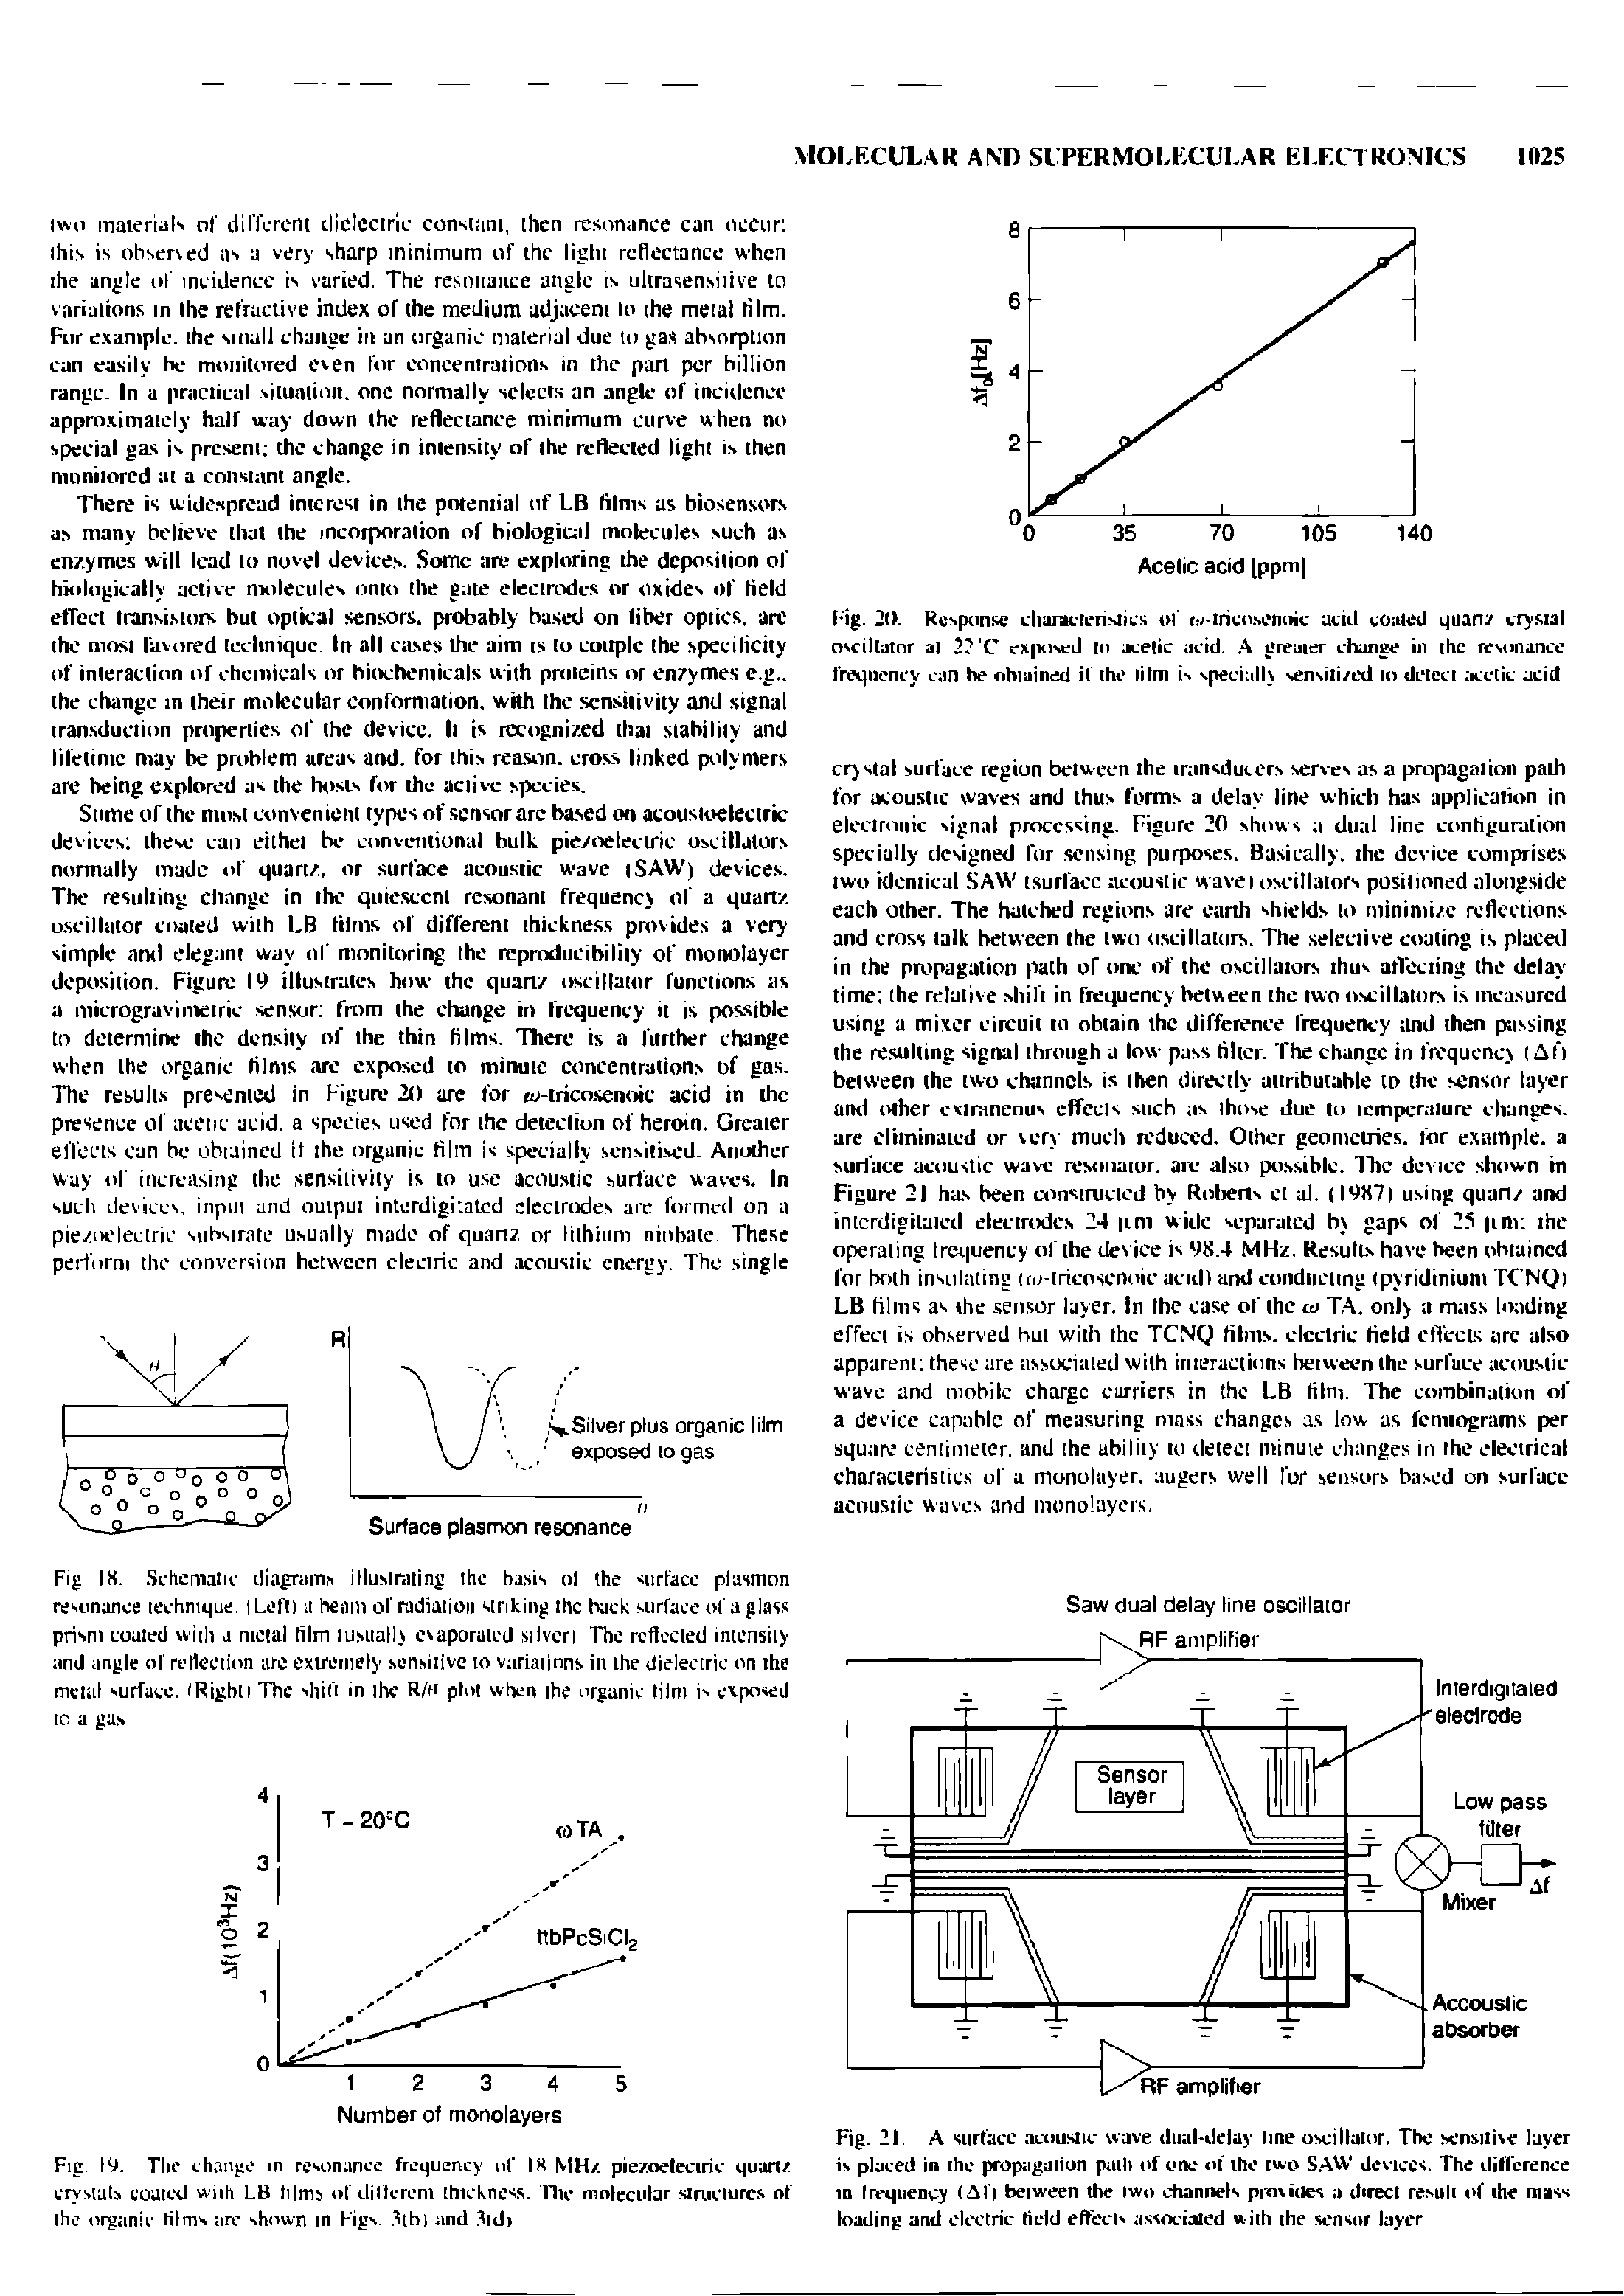 Fig. 21. A surface acoustic wave dual-delay line oscillator. The sensitise layer is placed in the propagation path of one of the two SAW devices. The differenee in Ireqnency (At) between the two channels provides a dtrecl result of the mass loading and electric field effects associated w ith the sensor layer...